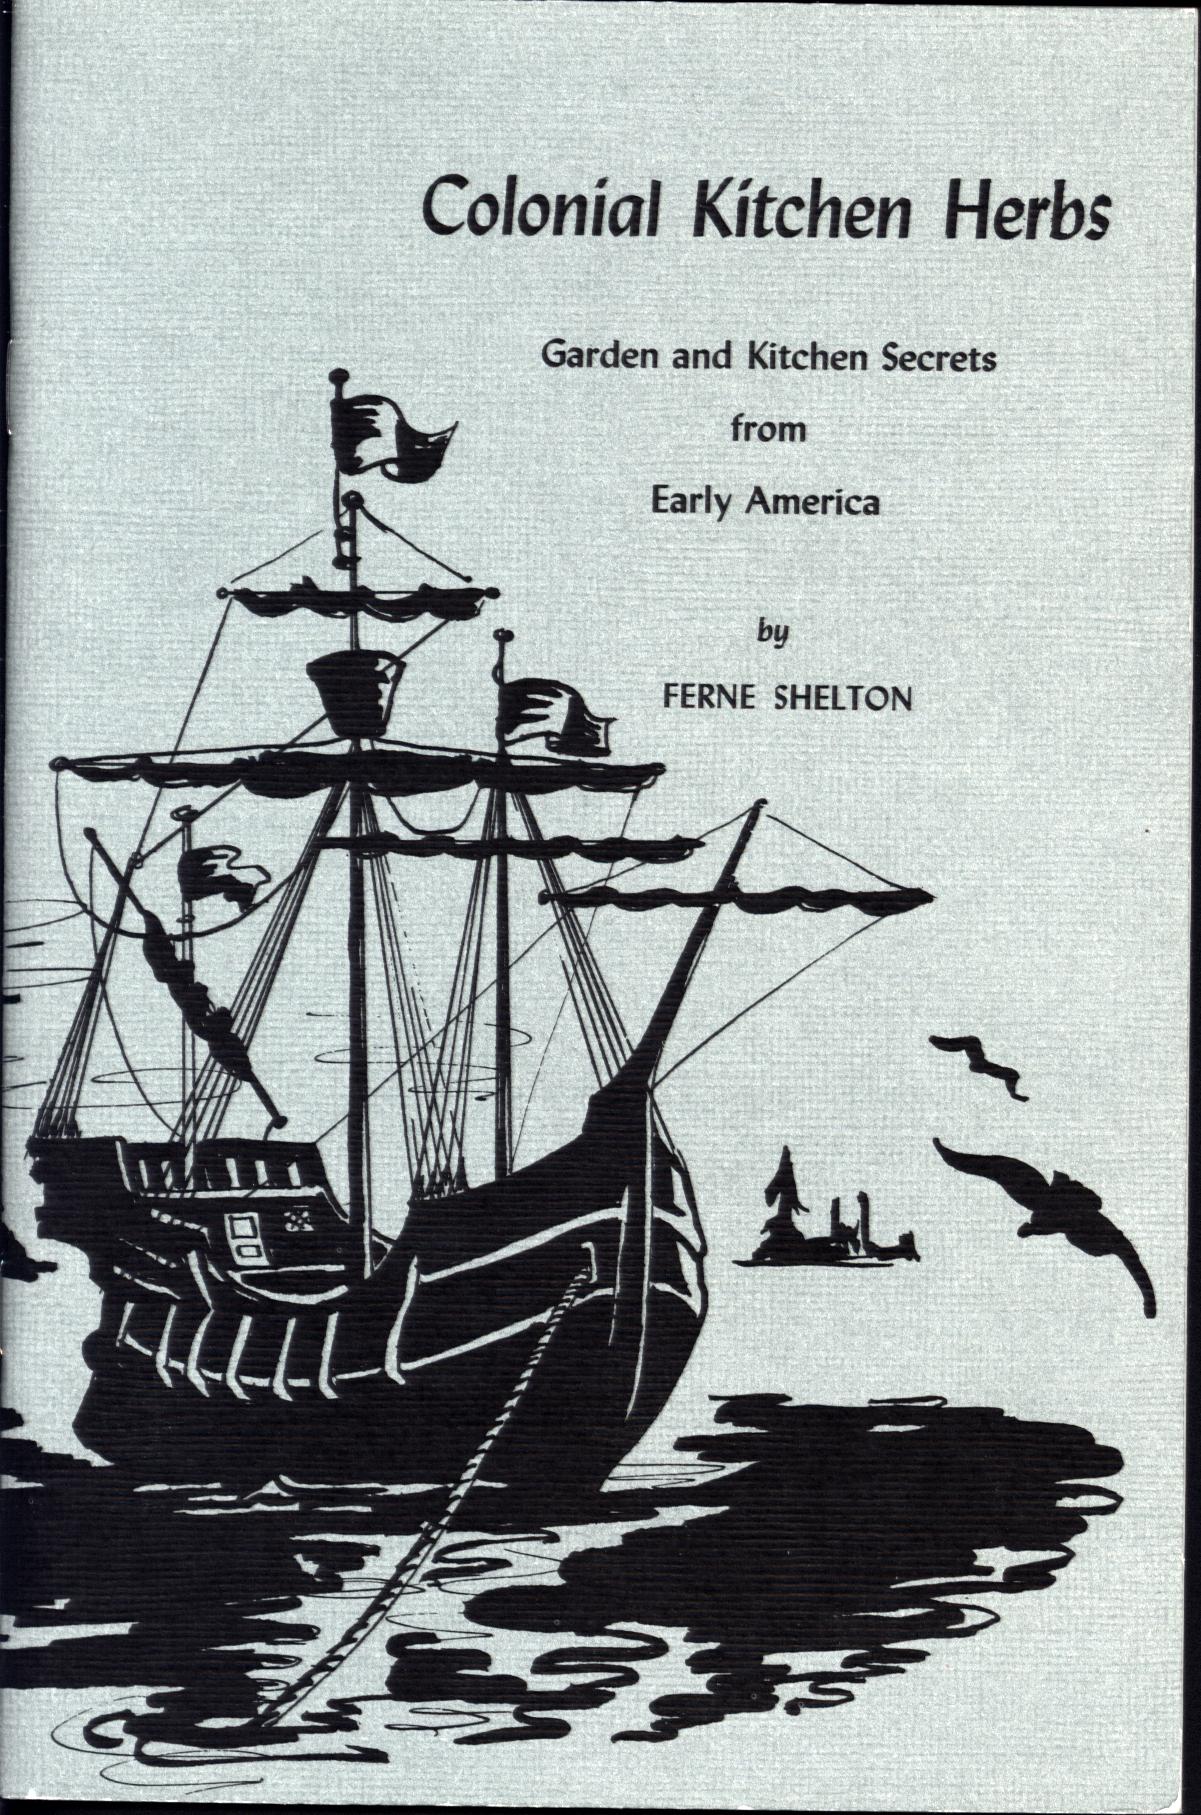 COLONIAL KITCHEN HERBS AND REMEDIES: garden and kitchen secrets from early America.